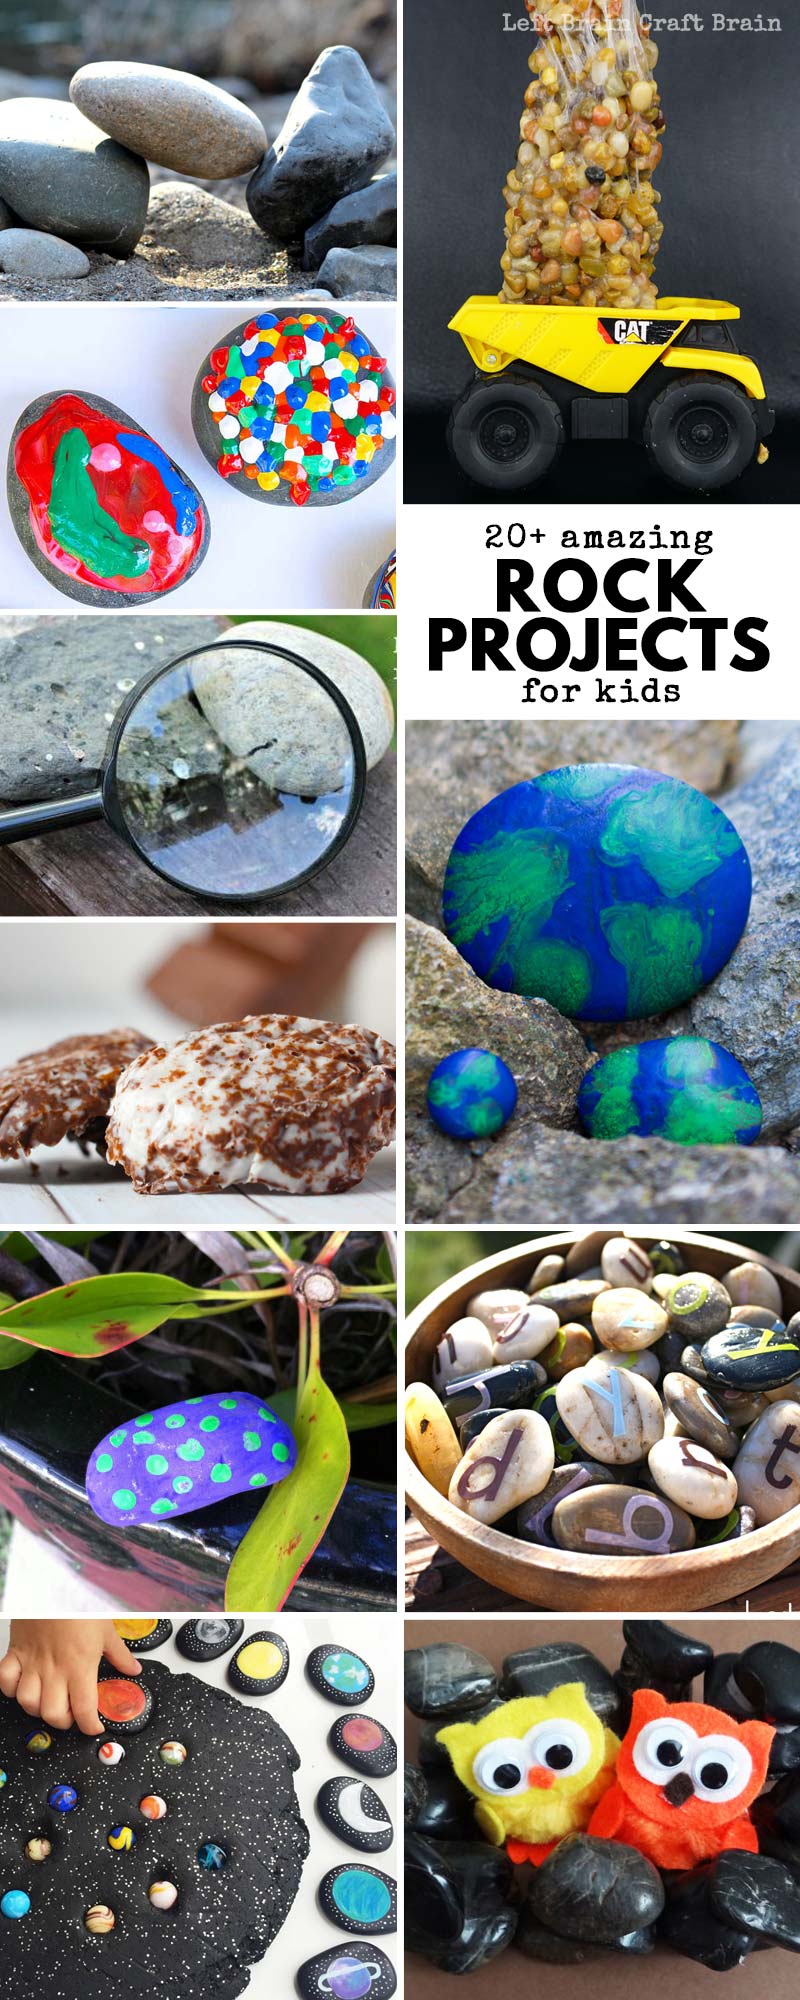 Try these Amazing Rock Projects to Do with Kids! Kids will love DIY rock crafts, rock play, and rock science! Rocks projects are cheap and easy ways to keep entertained this spring. Perfect for Earth Day or any other day of the year!